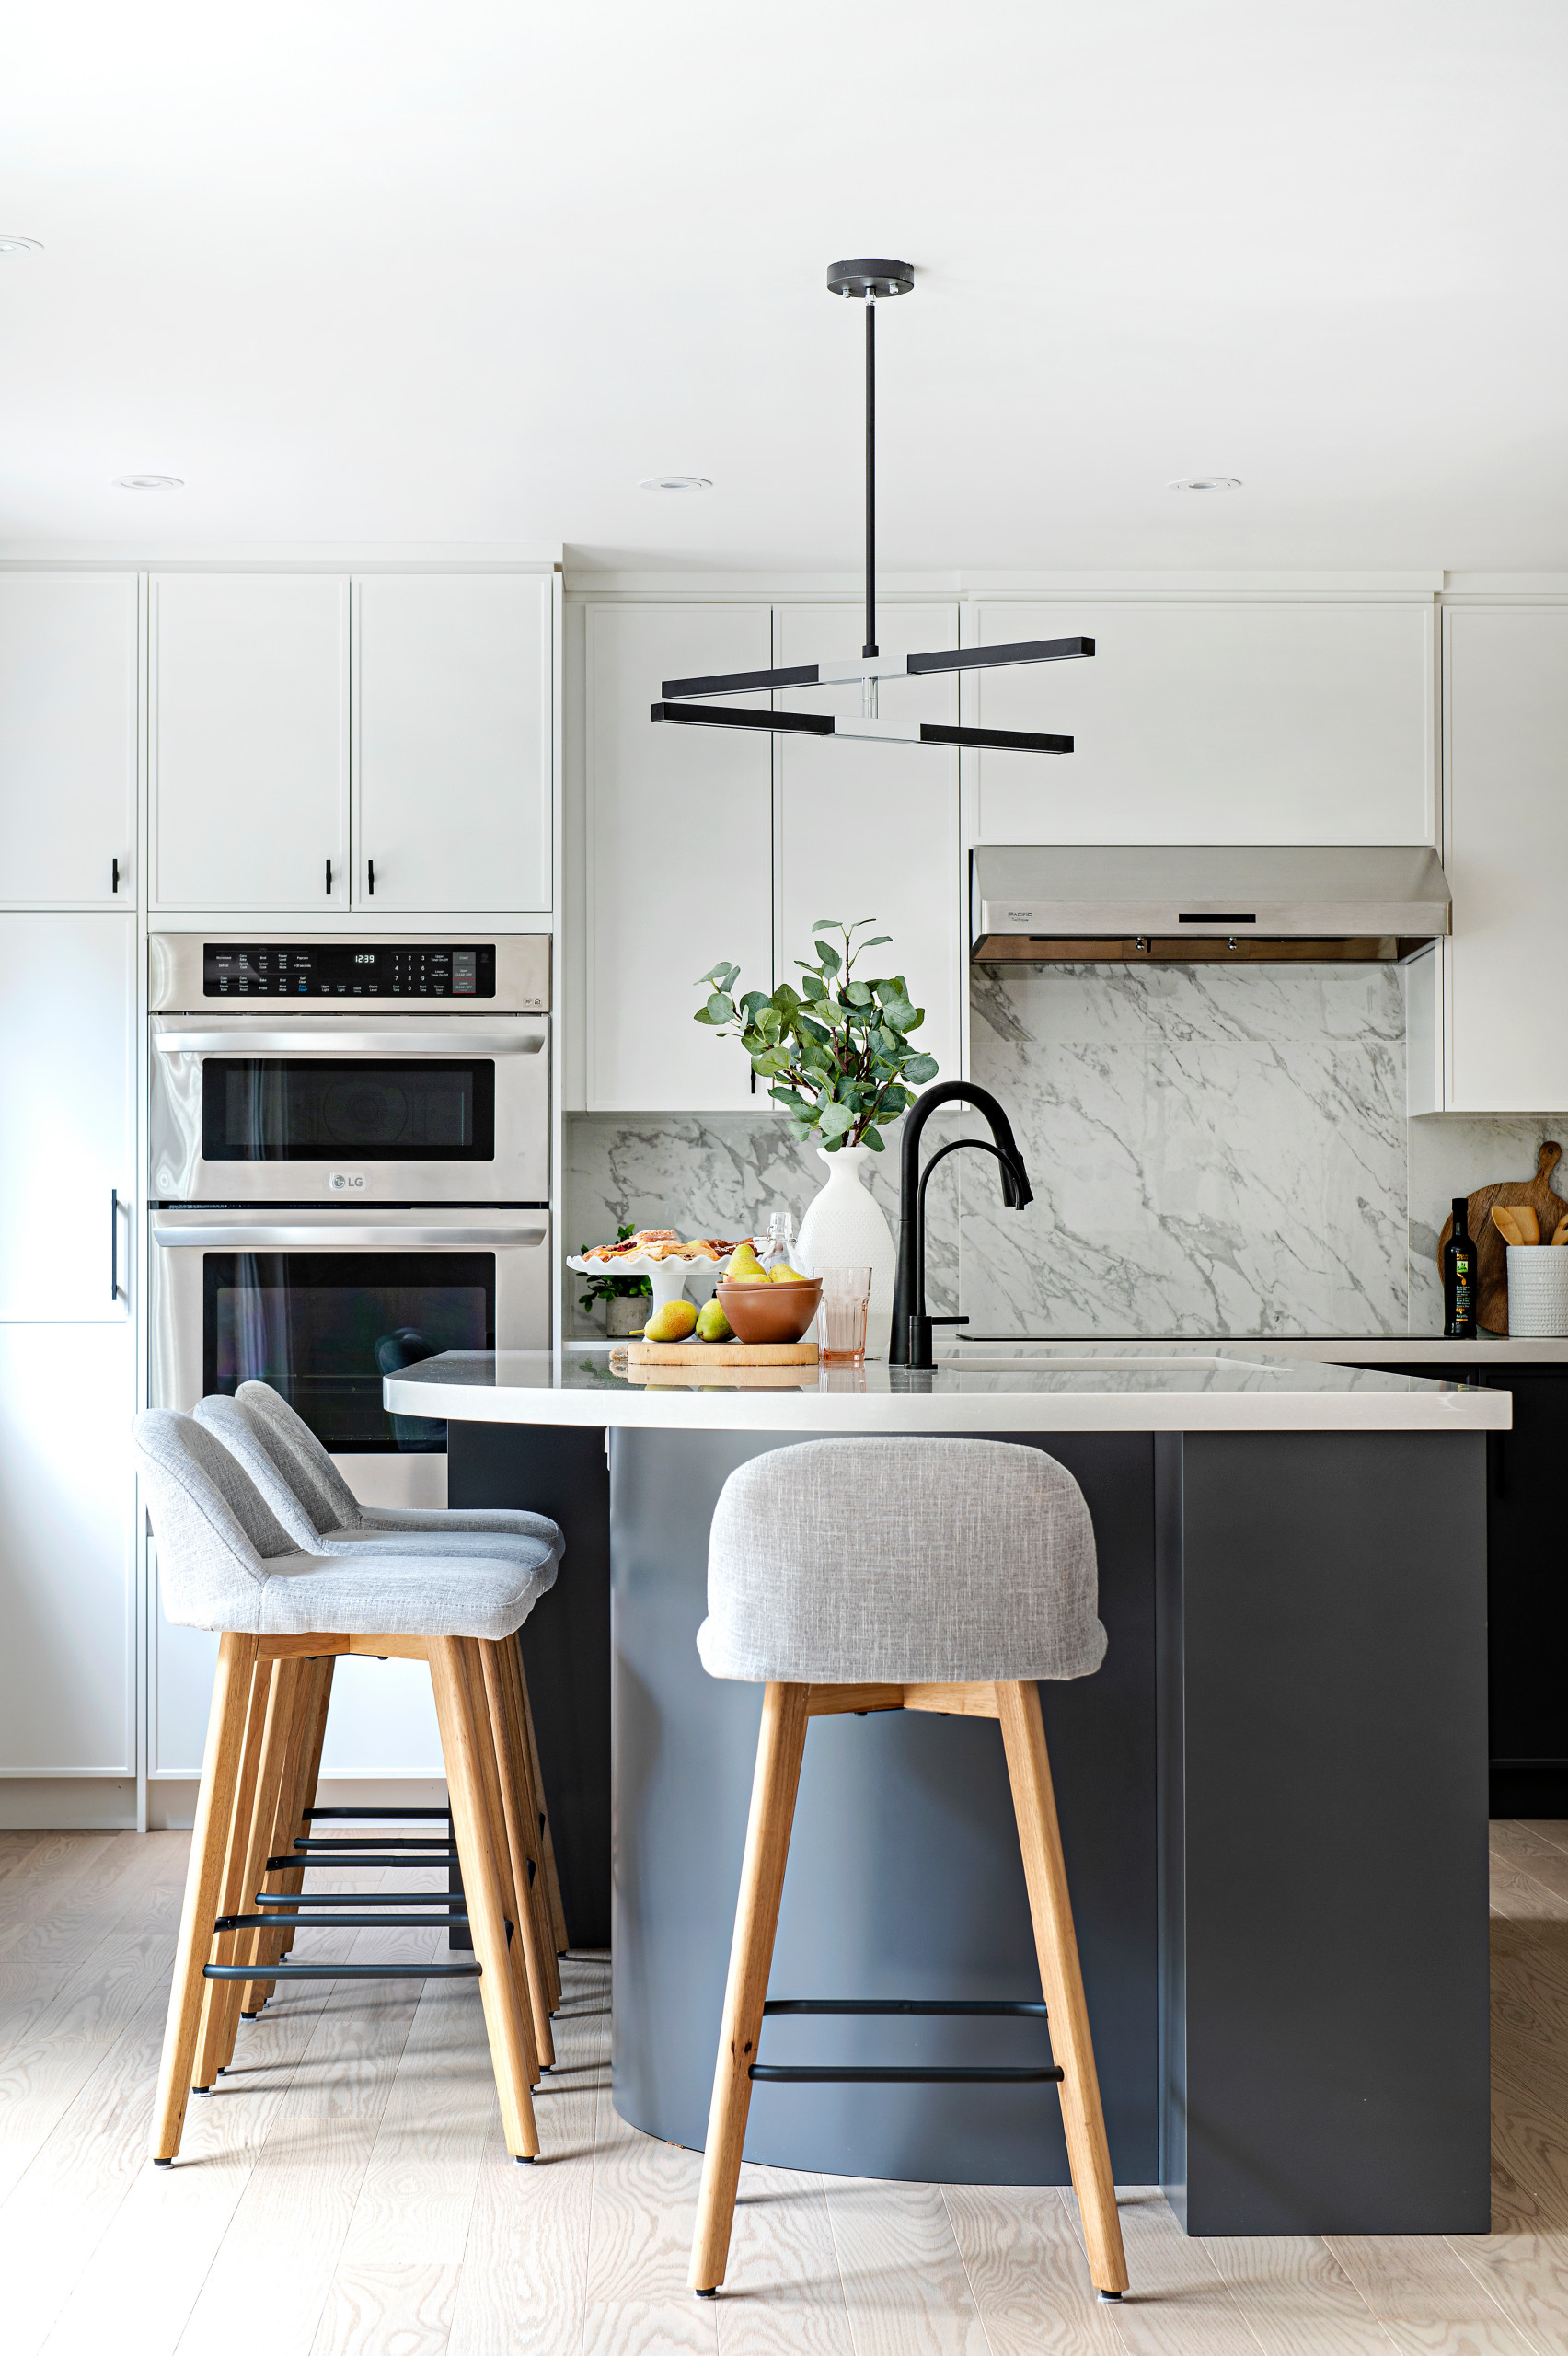 Shaker kitchen ideas – 10 ways to embrace this classic style